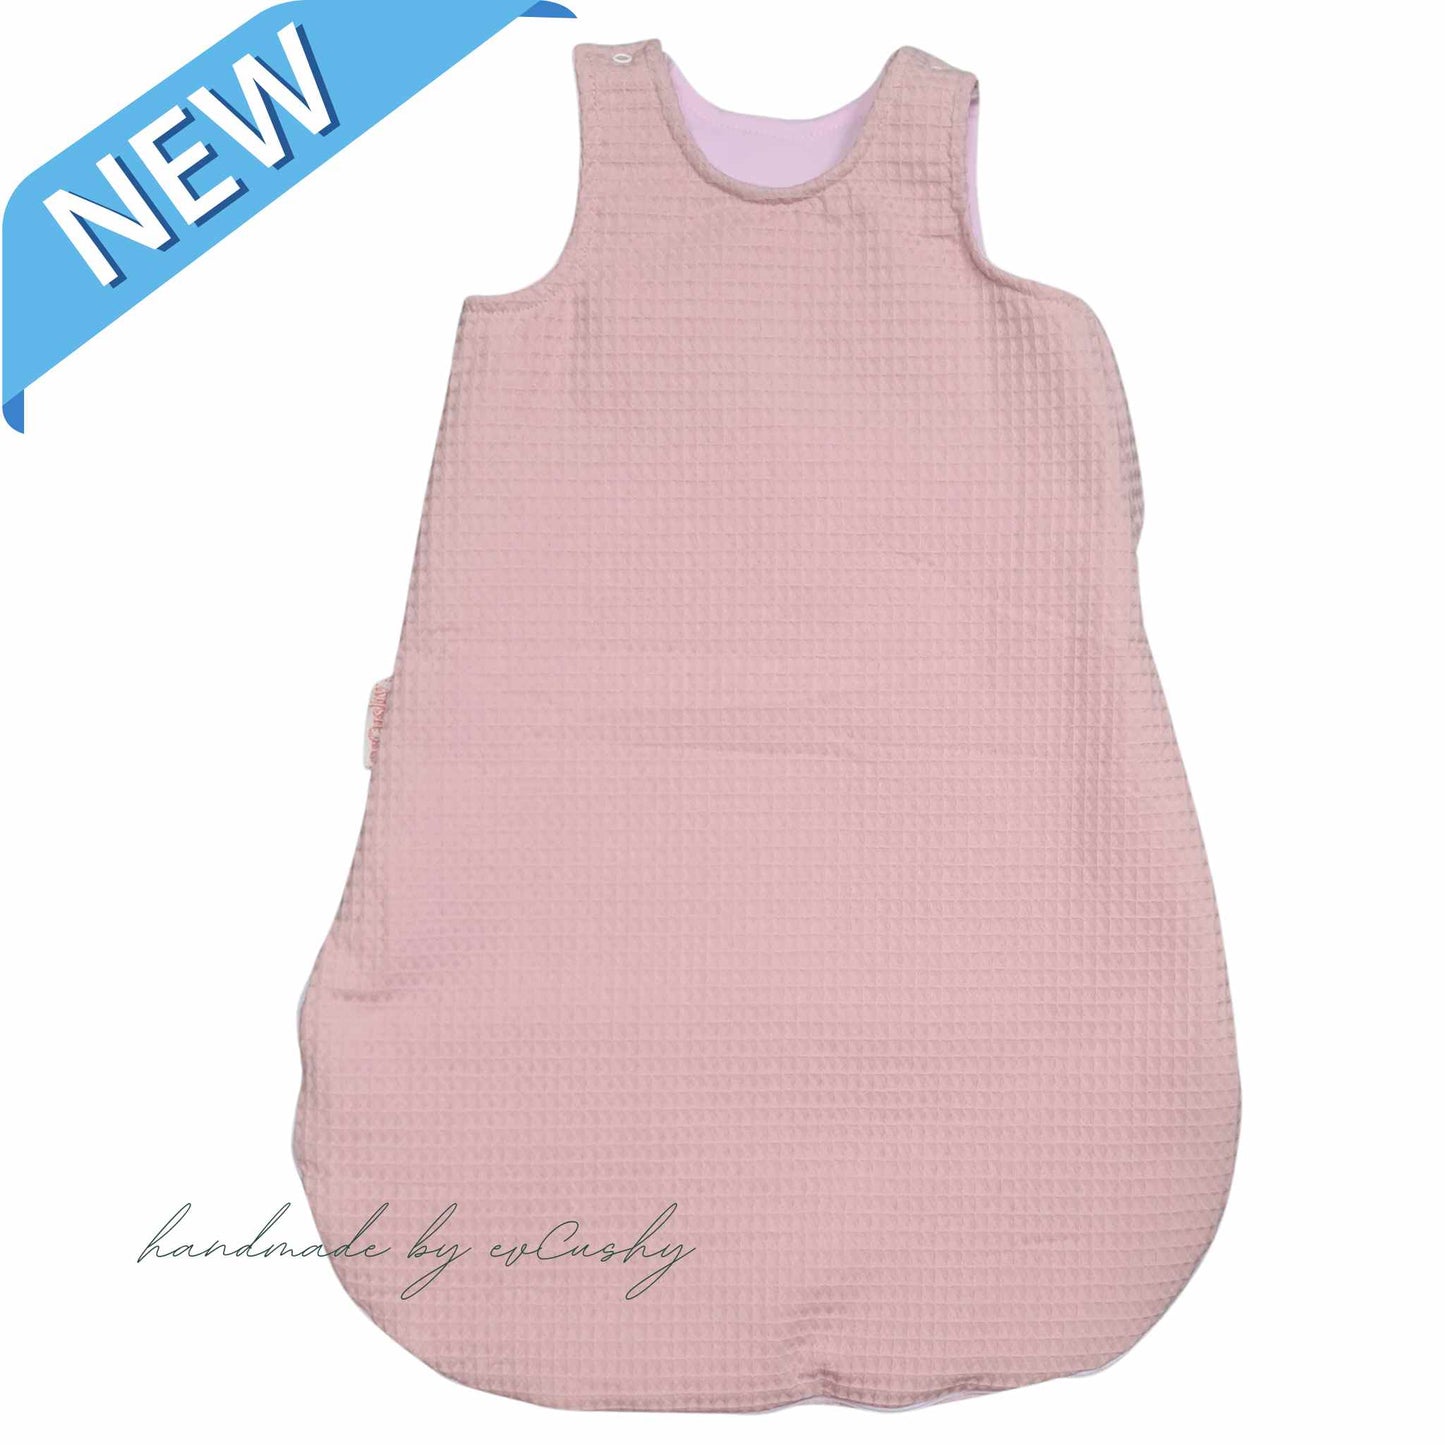 plain sleeping bag for baby dasty pink with pink lining 100% cotton 6-18 months in Ireland